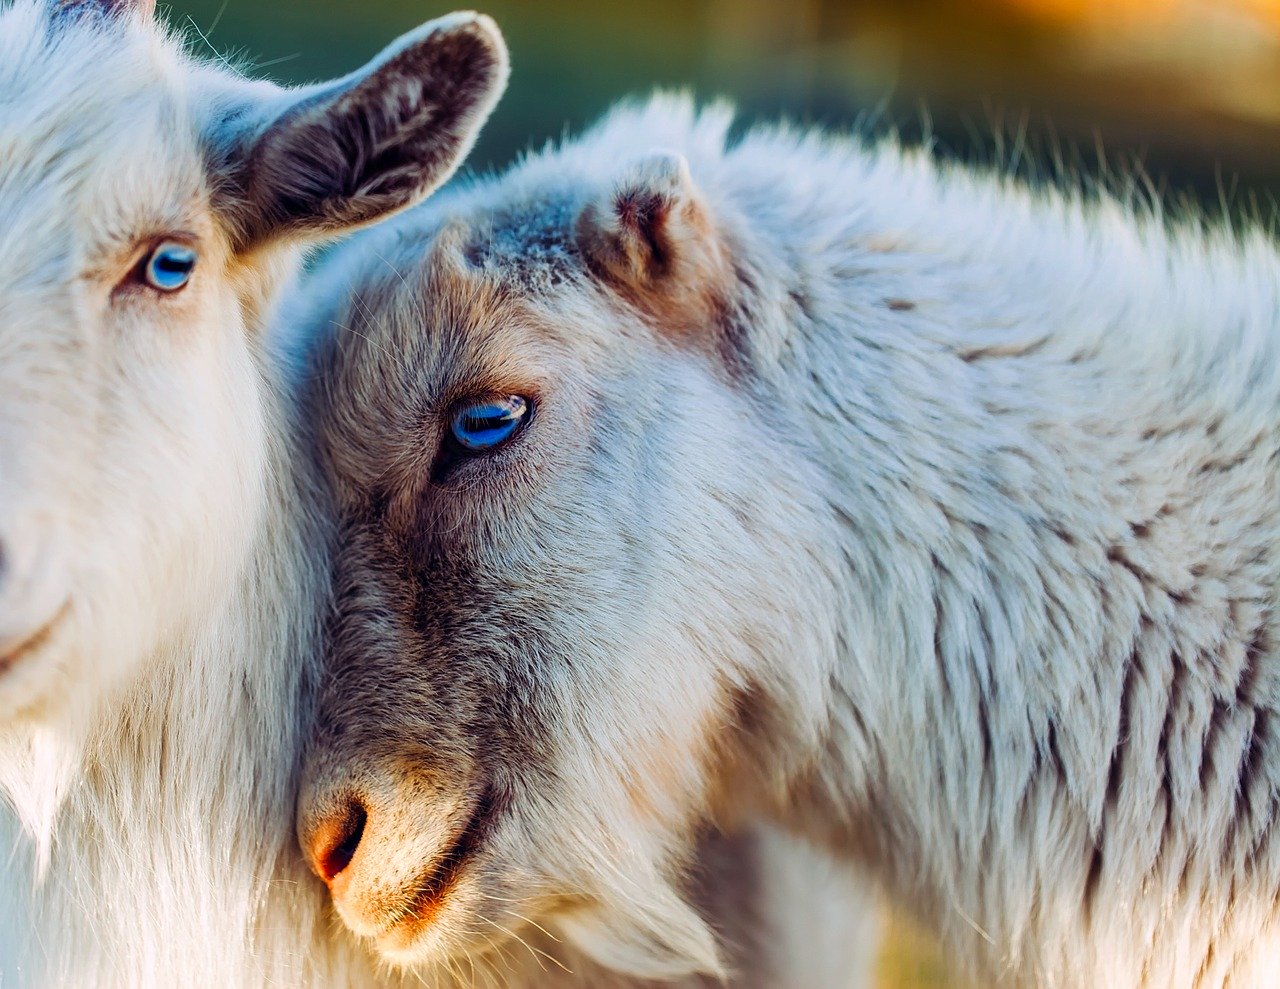 Prada, Gucci buy cashmere from farms that abuse goats: PETA